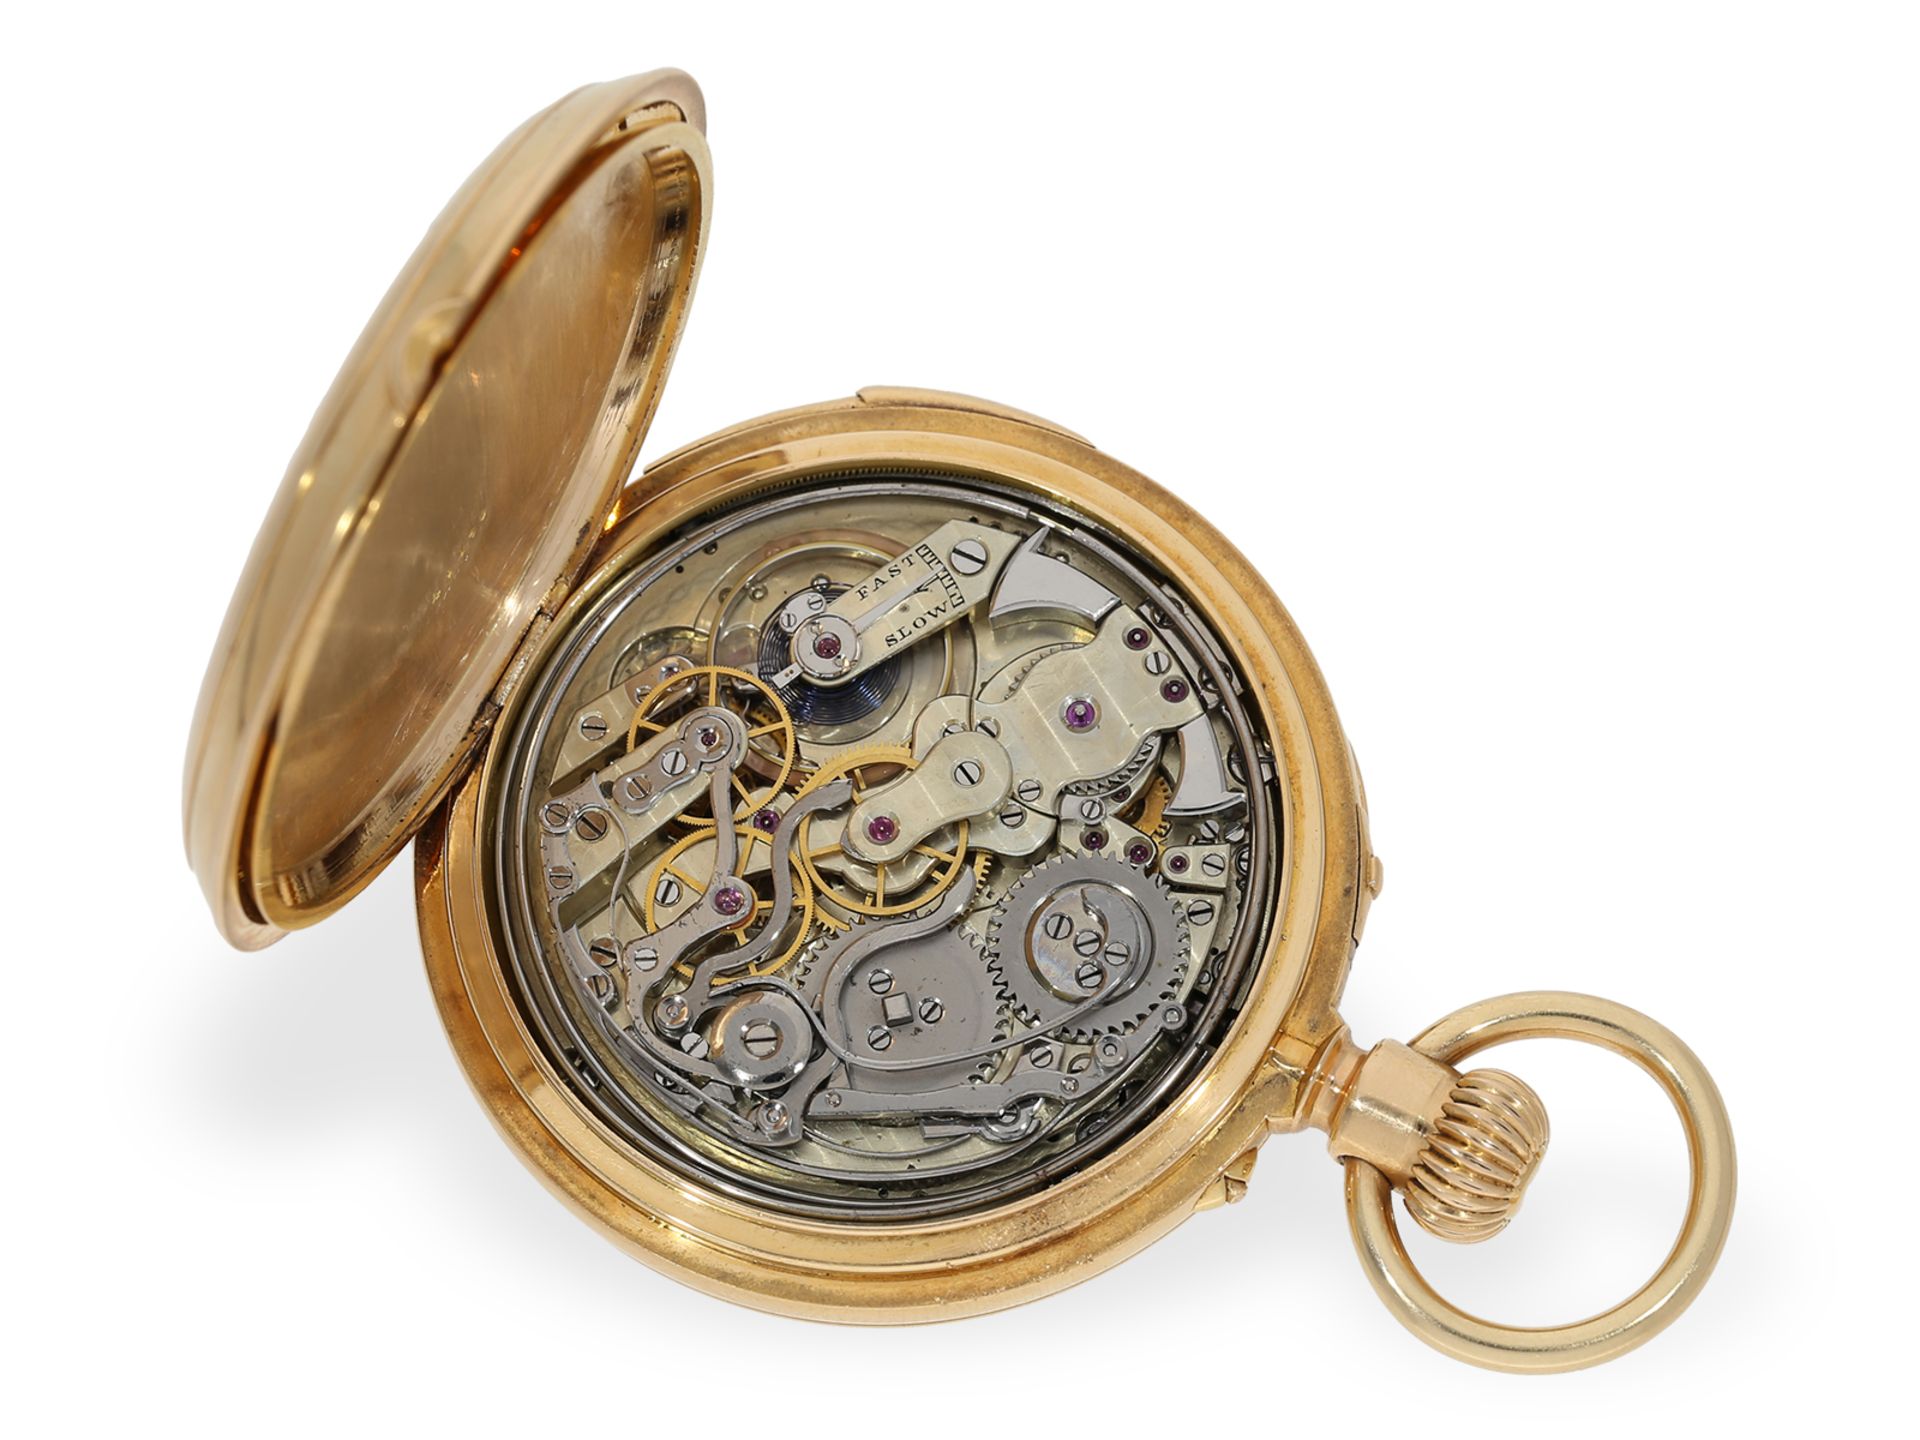 Pocket watch: Patek Philippe with double complication, chronograph and 5-minute repeater, Geneva 187 - Image 3 of 7